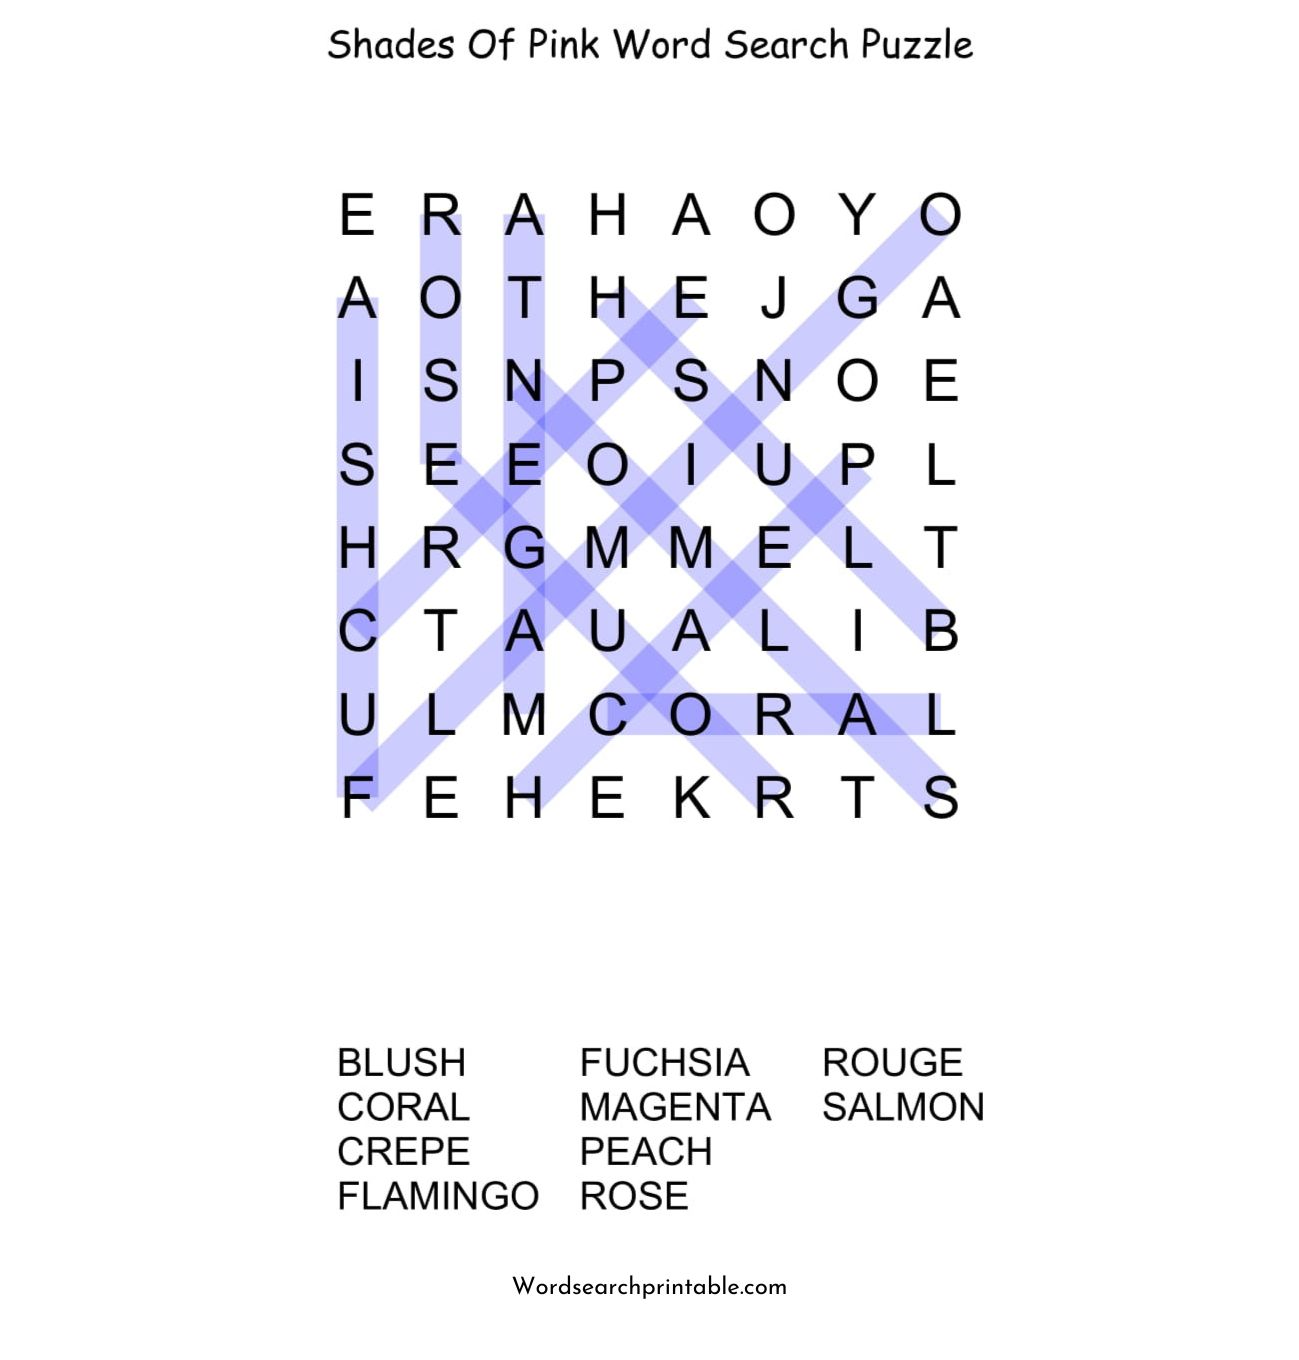 shades of pink word search puzzle solution